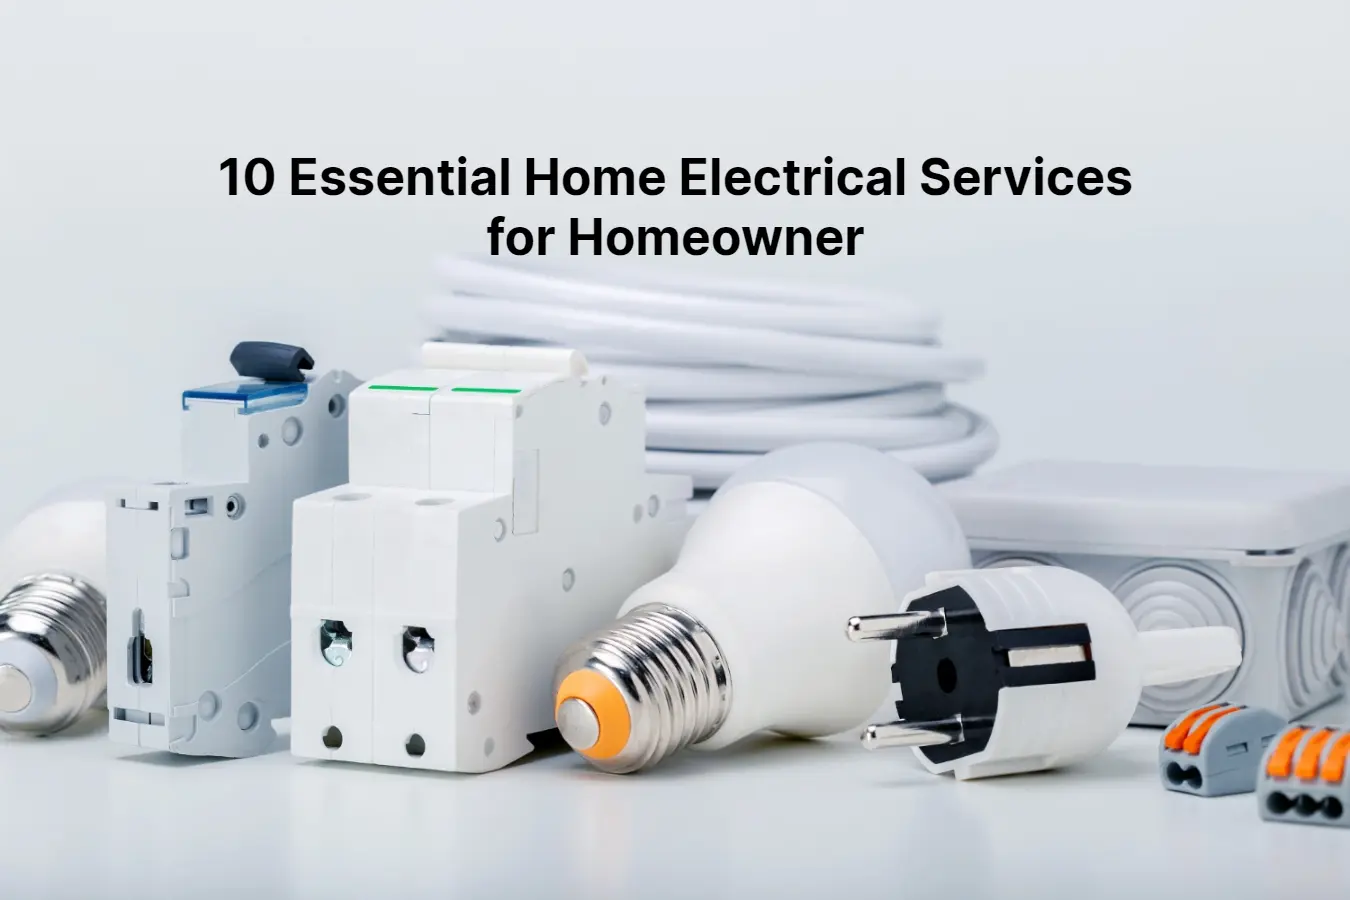 10 Essential Home Electrical Services for Homeowner